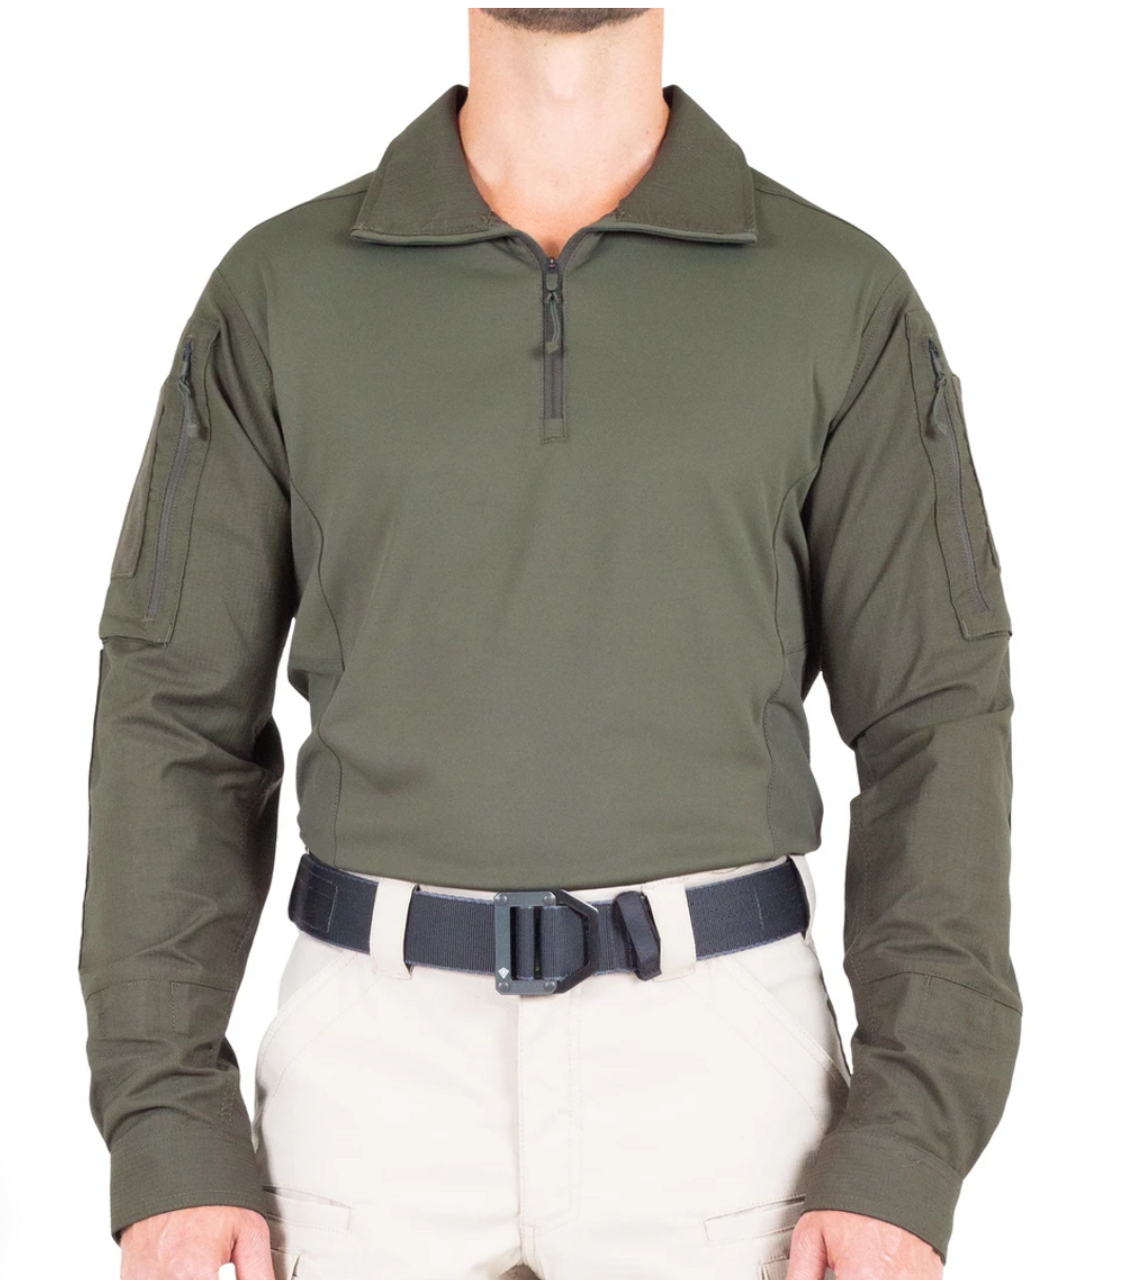 First Tactical's Defender Series Shirts are the best of both worlds: performance built to handle any mission while maintaining the professional look needed when on normal patrol. In the performance department specialized pockets boast ample space for oversized gear, a specialize yoke eliminates unwanted bulk, and oversized sleeve pockets accept patches or embroidery. Creating the perfect warm weather shirt was at the forefront of design as articulated elbows, running gussets, and vented mesh locations provide advanced movement and breathability.